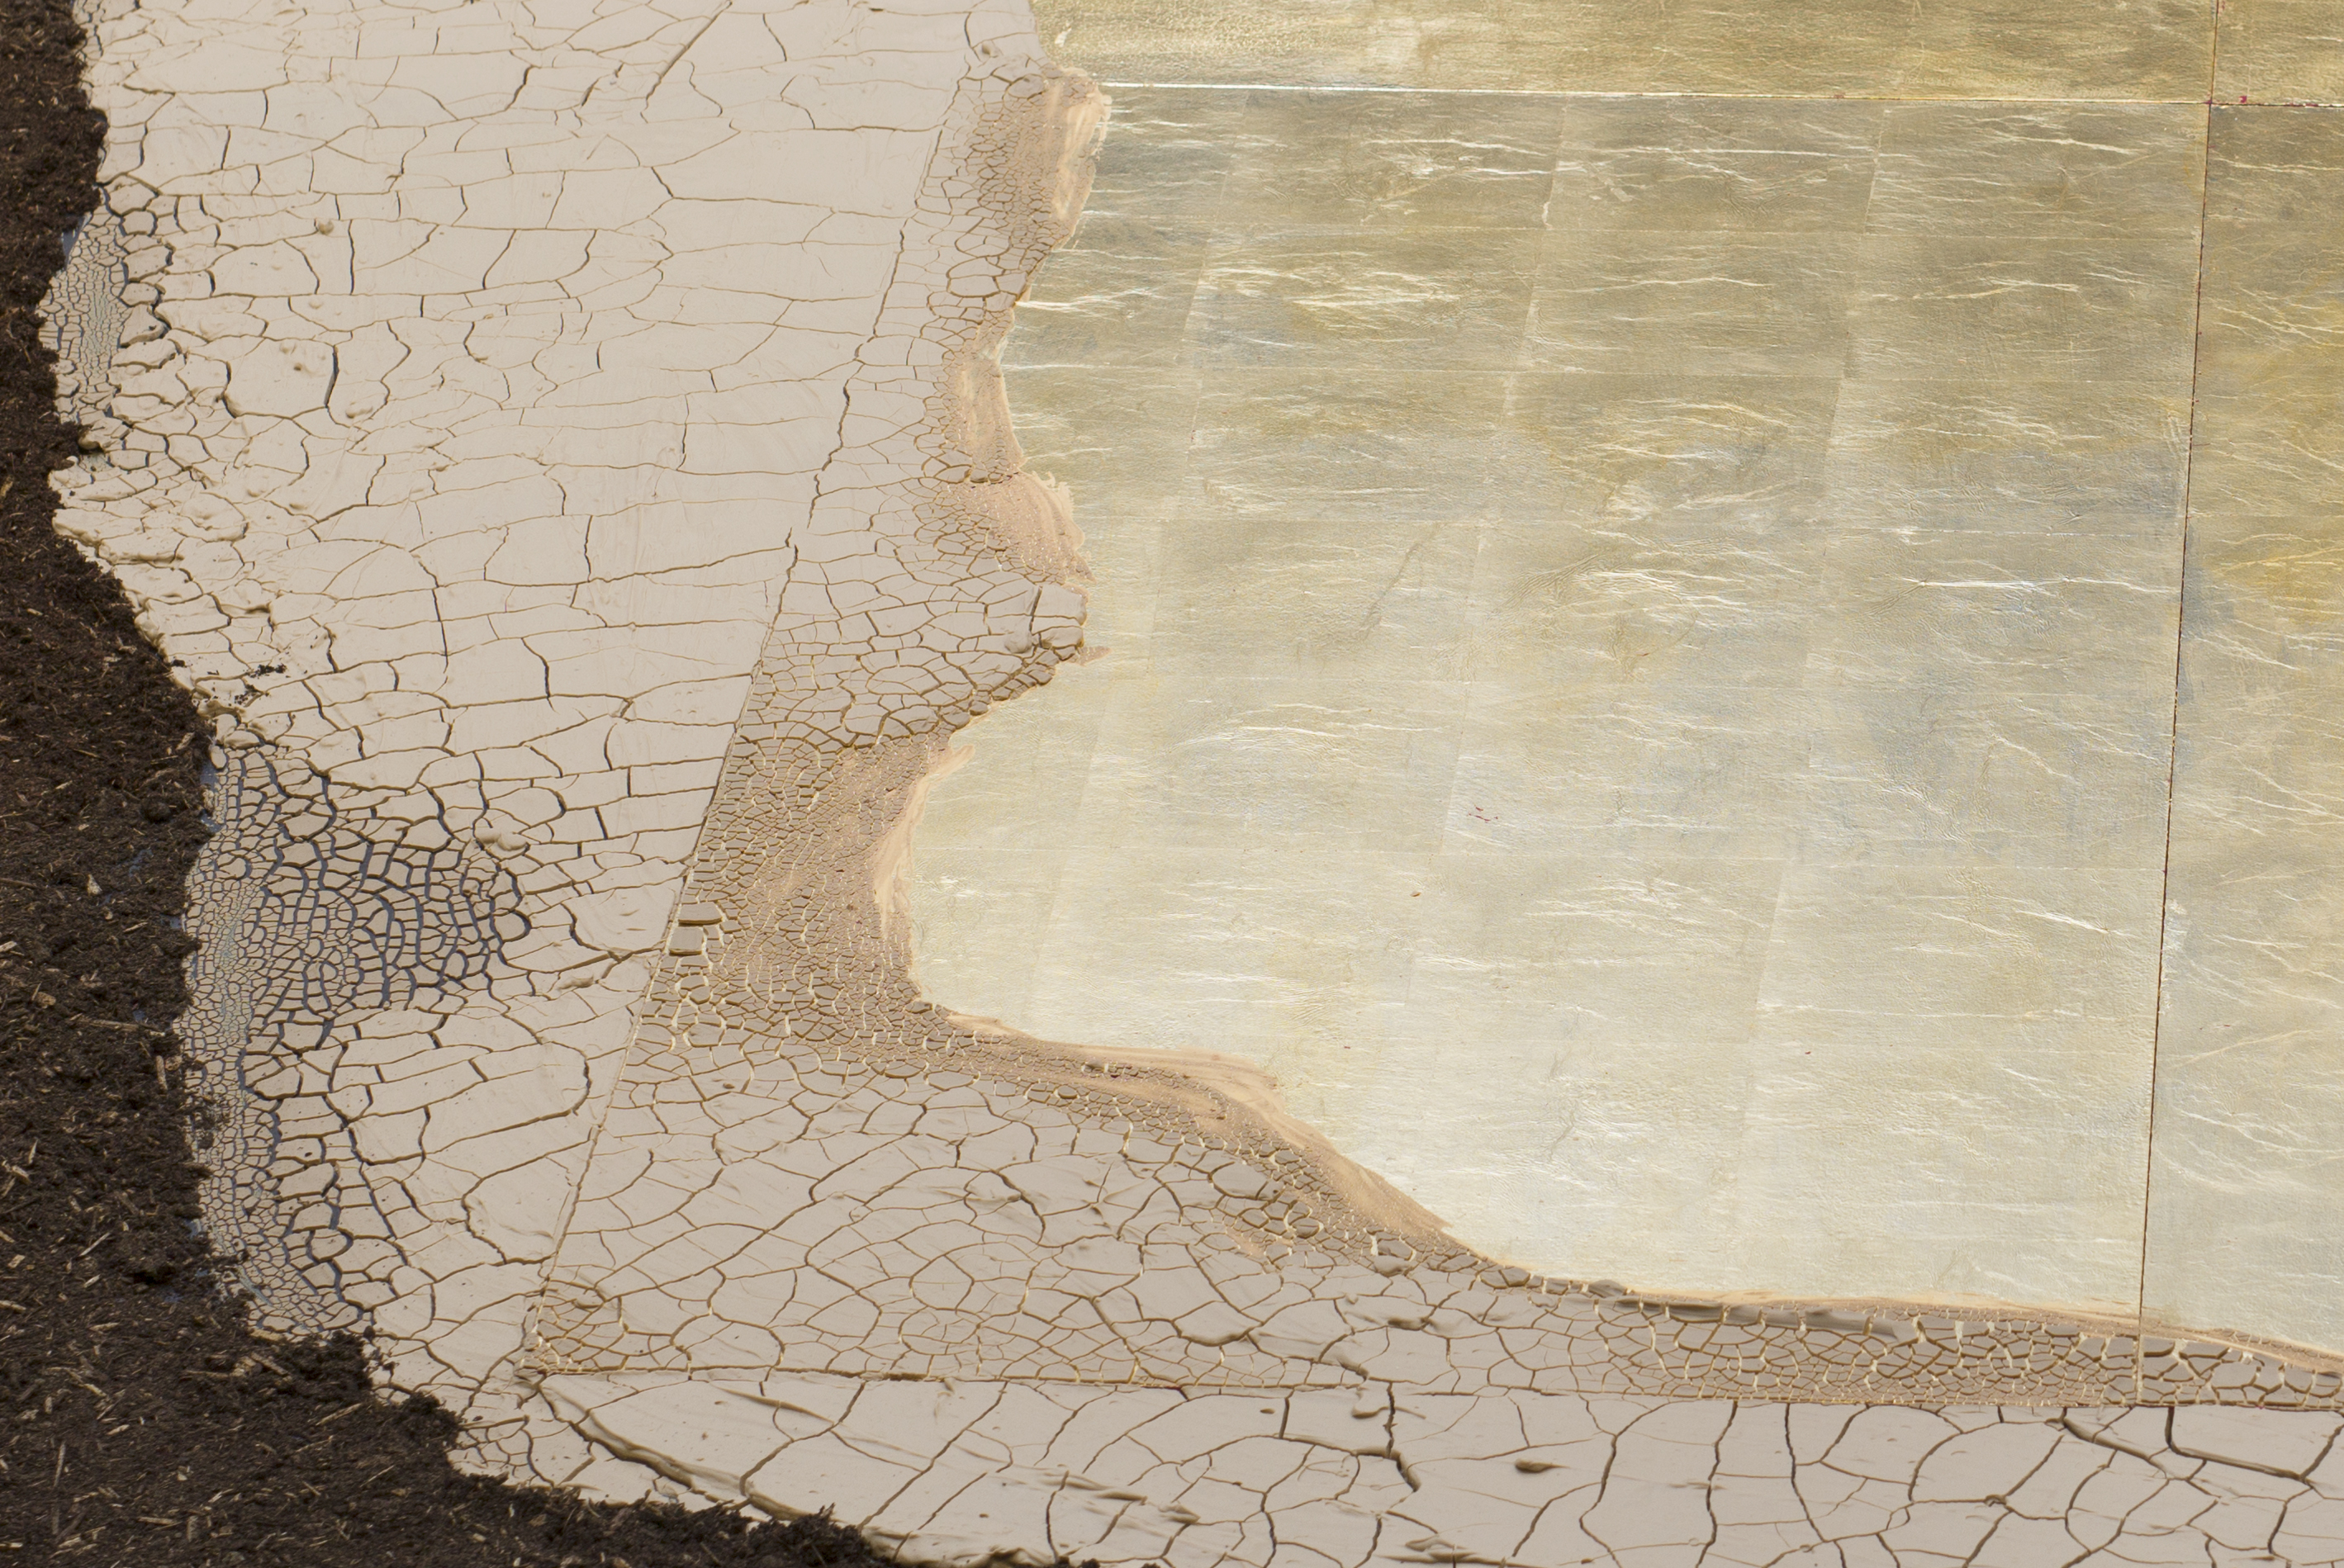 Azza Zein, 'Taskscape: Migrant lines in the depositing of movement' (detail), 2019,  clay, mica golden leaf on MDF, potting mix soil. Photo credit: Matthew Stanton